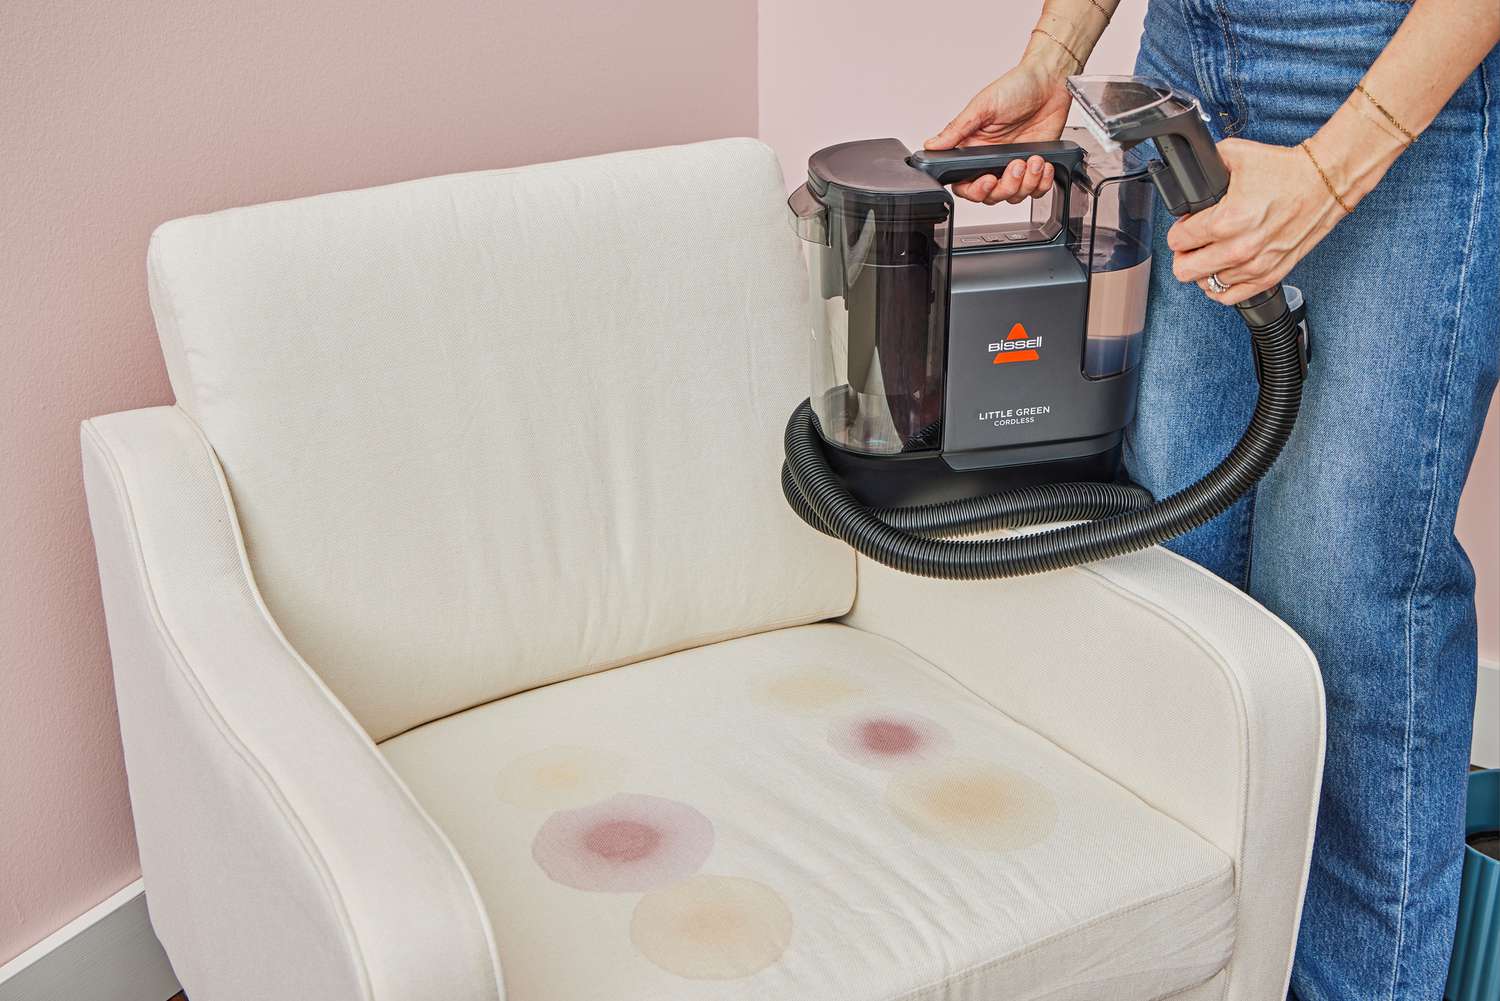 A person uses the Bissell Little Green Cordless Portable Carpet Cleaner 3682 to clean a stained white chair